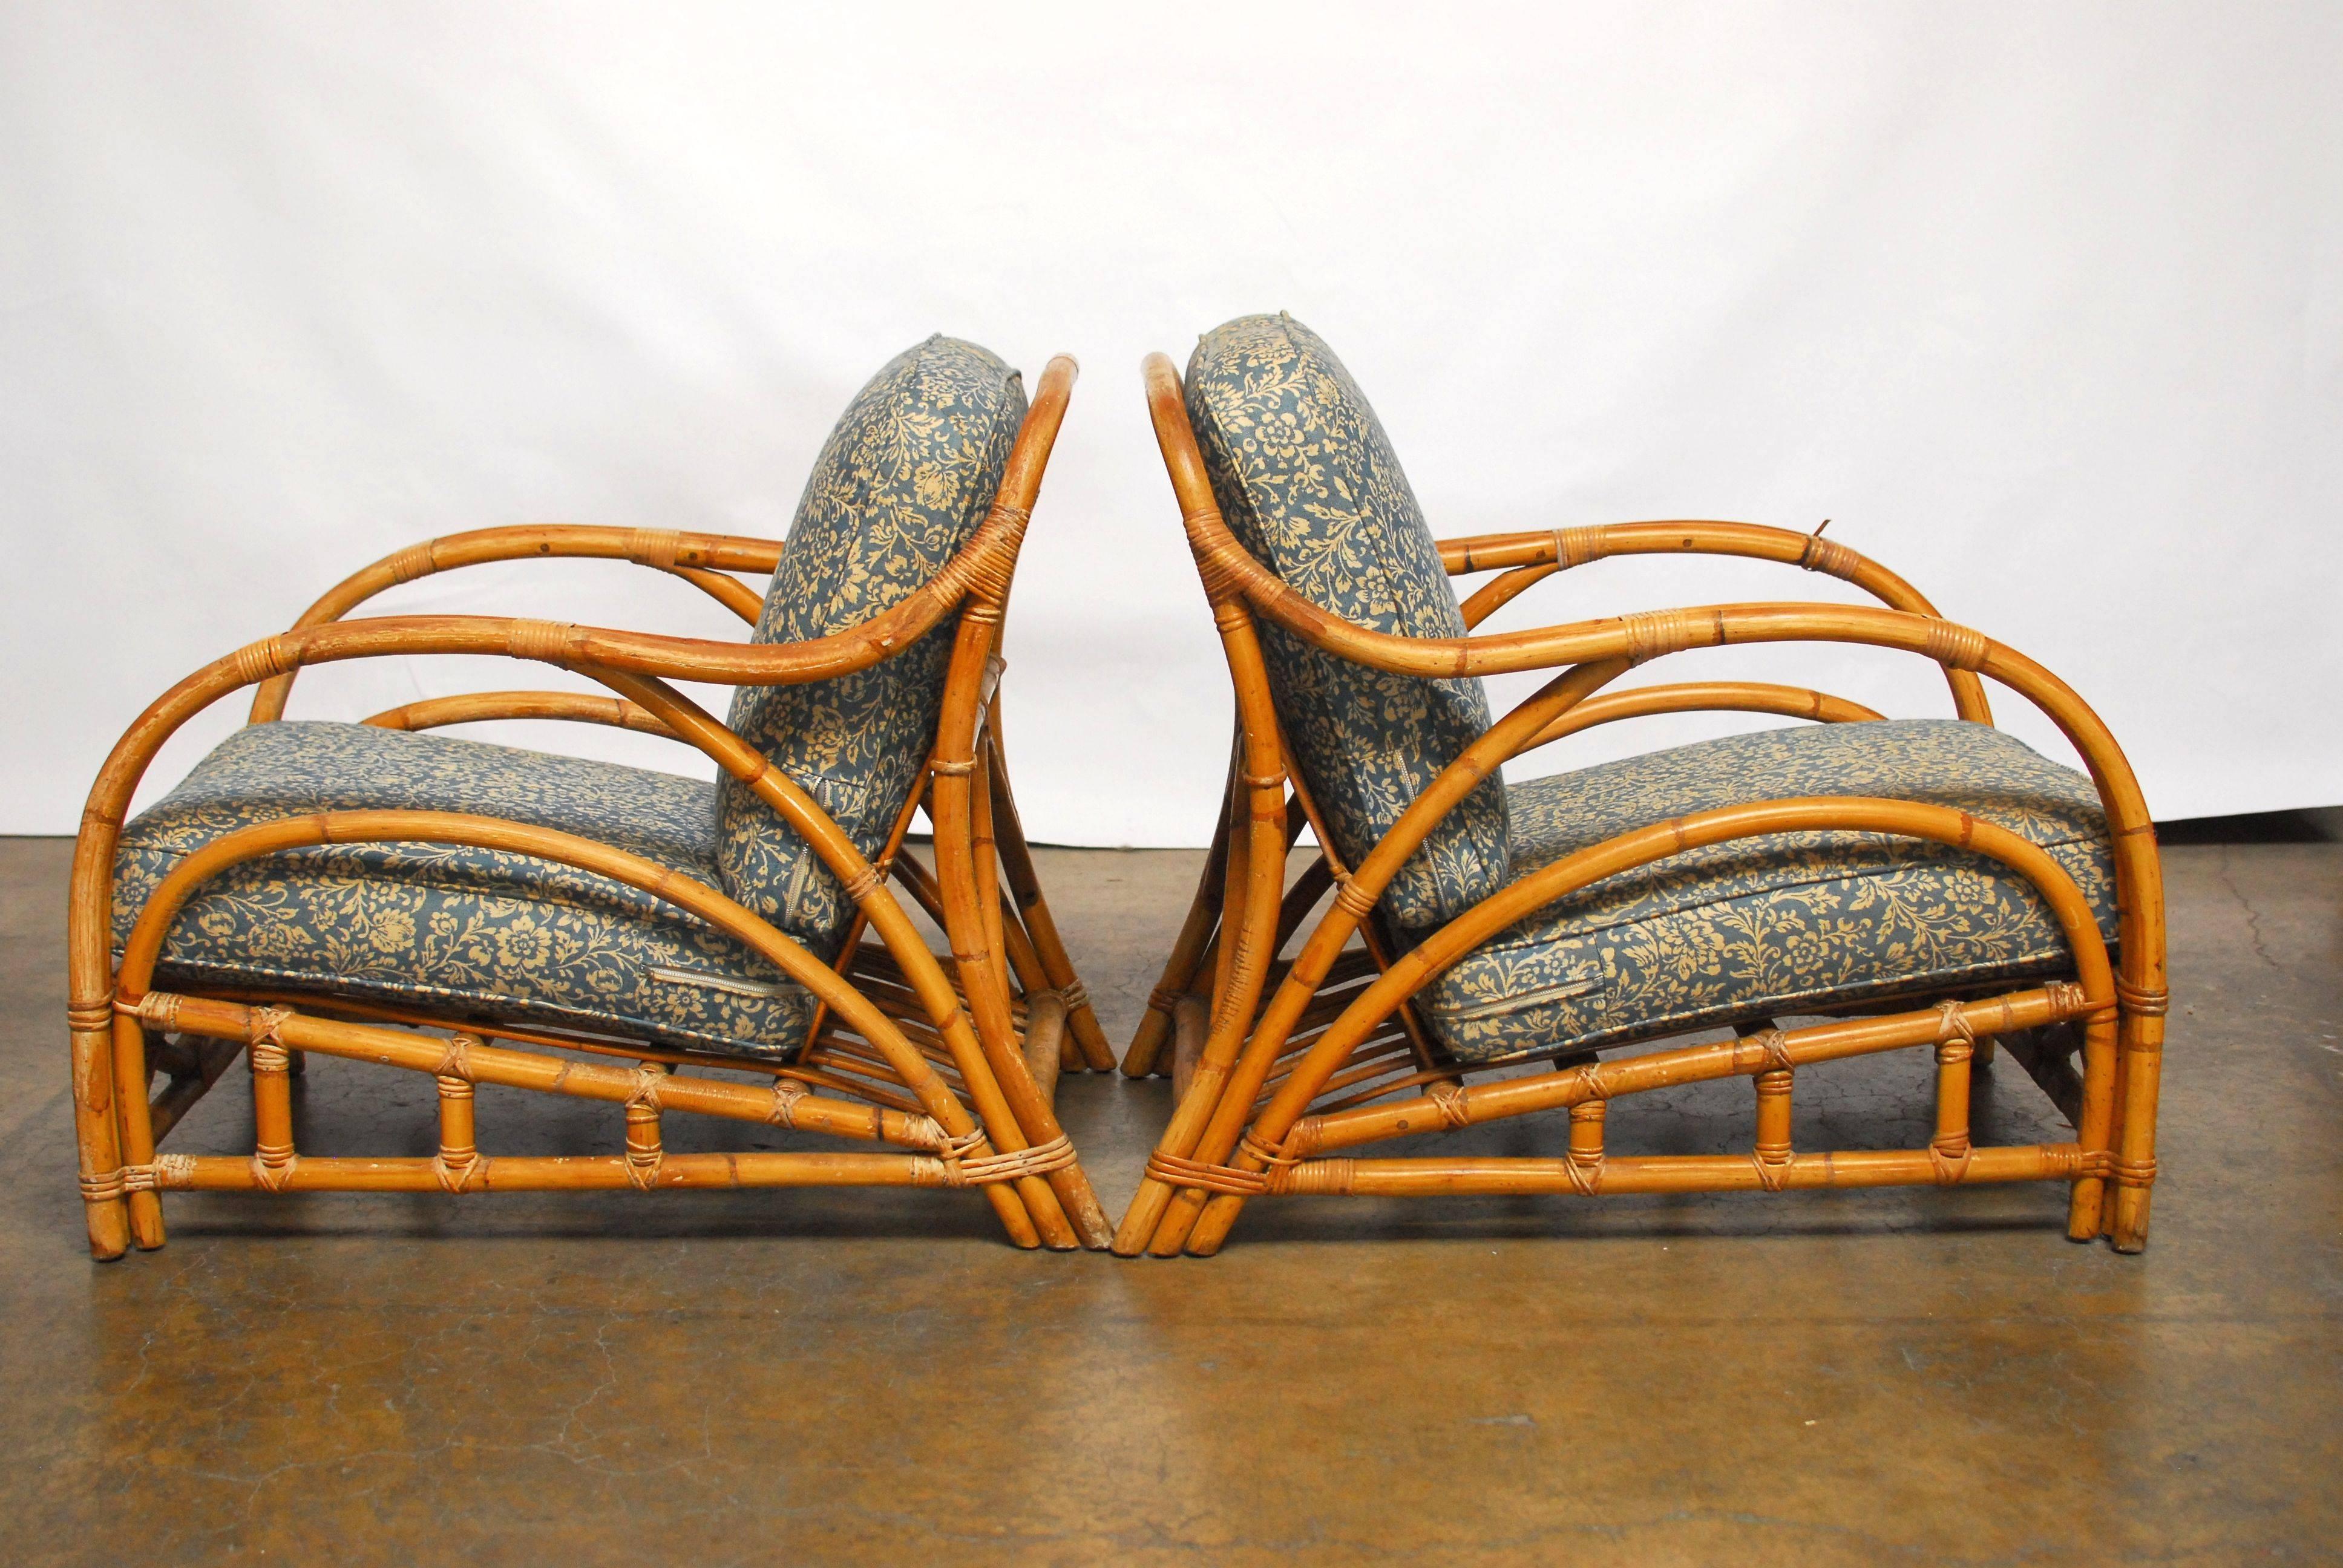 Pair of chic, Art Deco style bamboo lounge chairs with original condition upholstered cushions with a foliate pattern. Featuring a low slung seat and long, graceful curved arms. Includes a rattan ottoman foot stool. Rare design with complex aprons